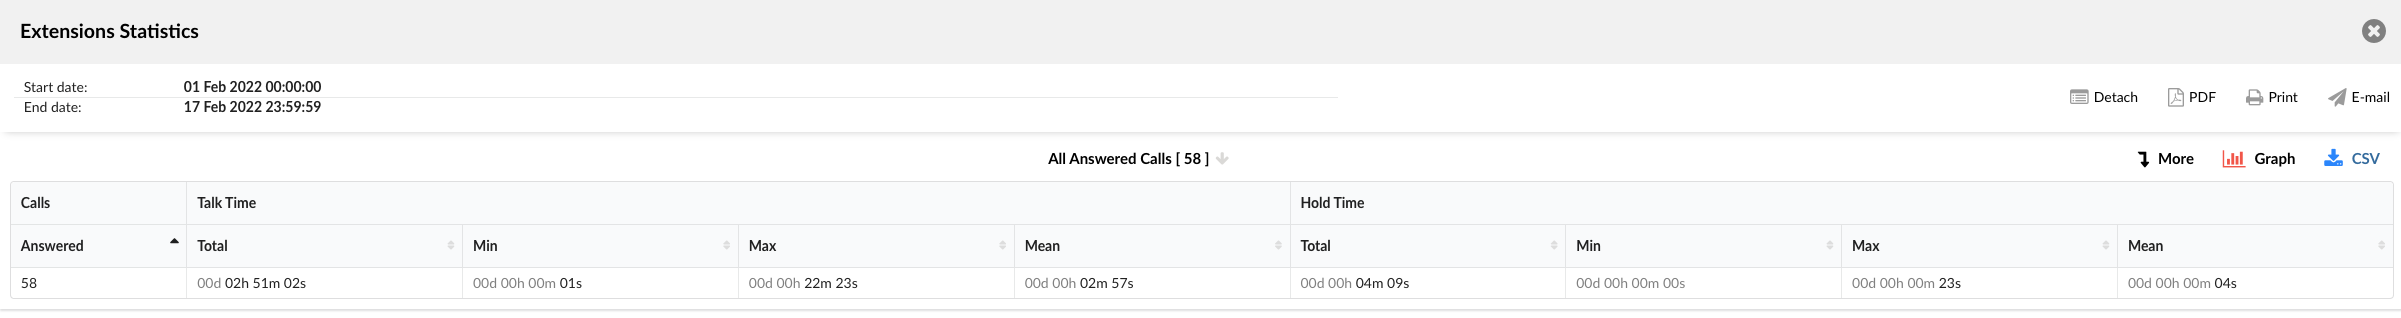 14-ext-statistics-all-answered-calls.png